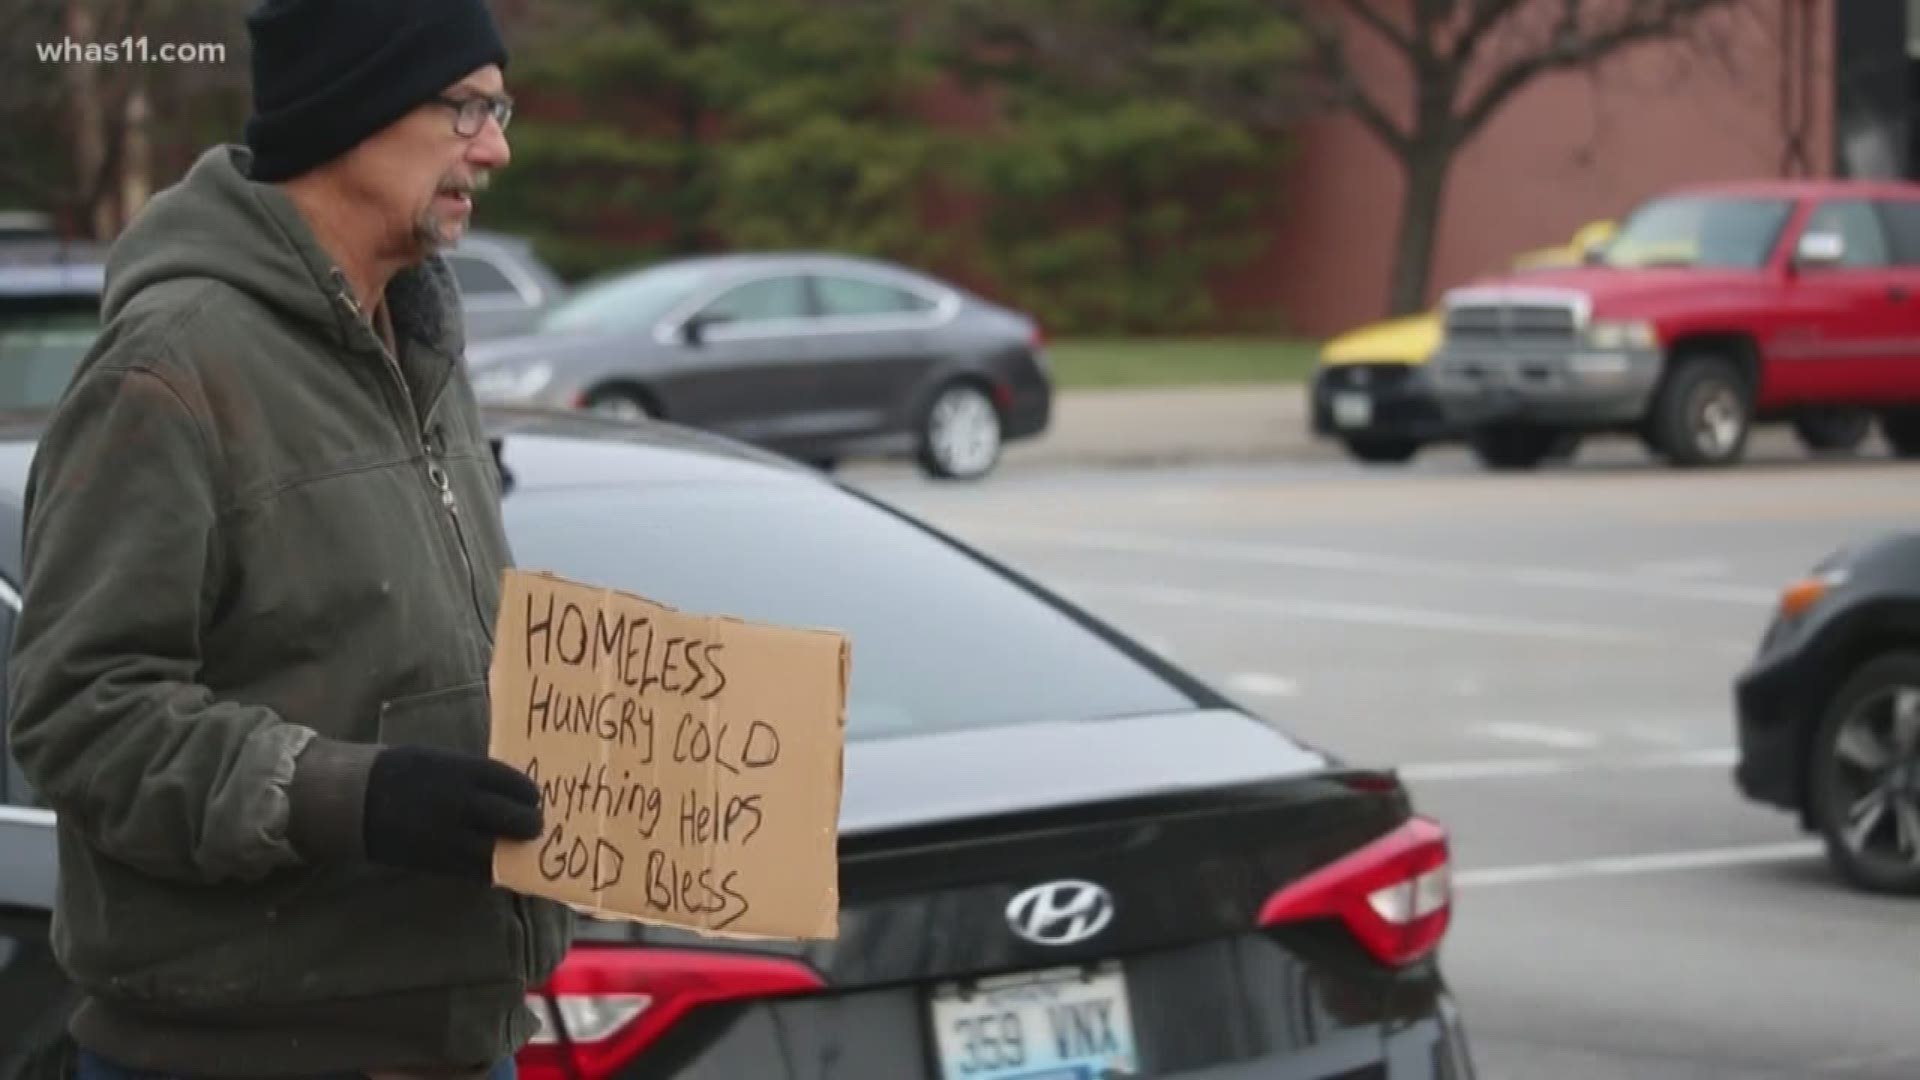 Panhandling is legal but that hasn't stopped some city leaders from pursuing solutions to problem panhandling.